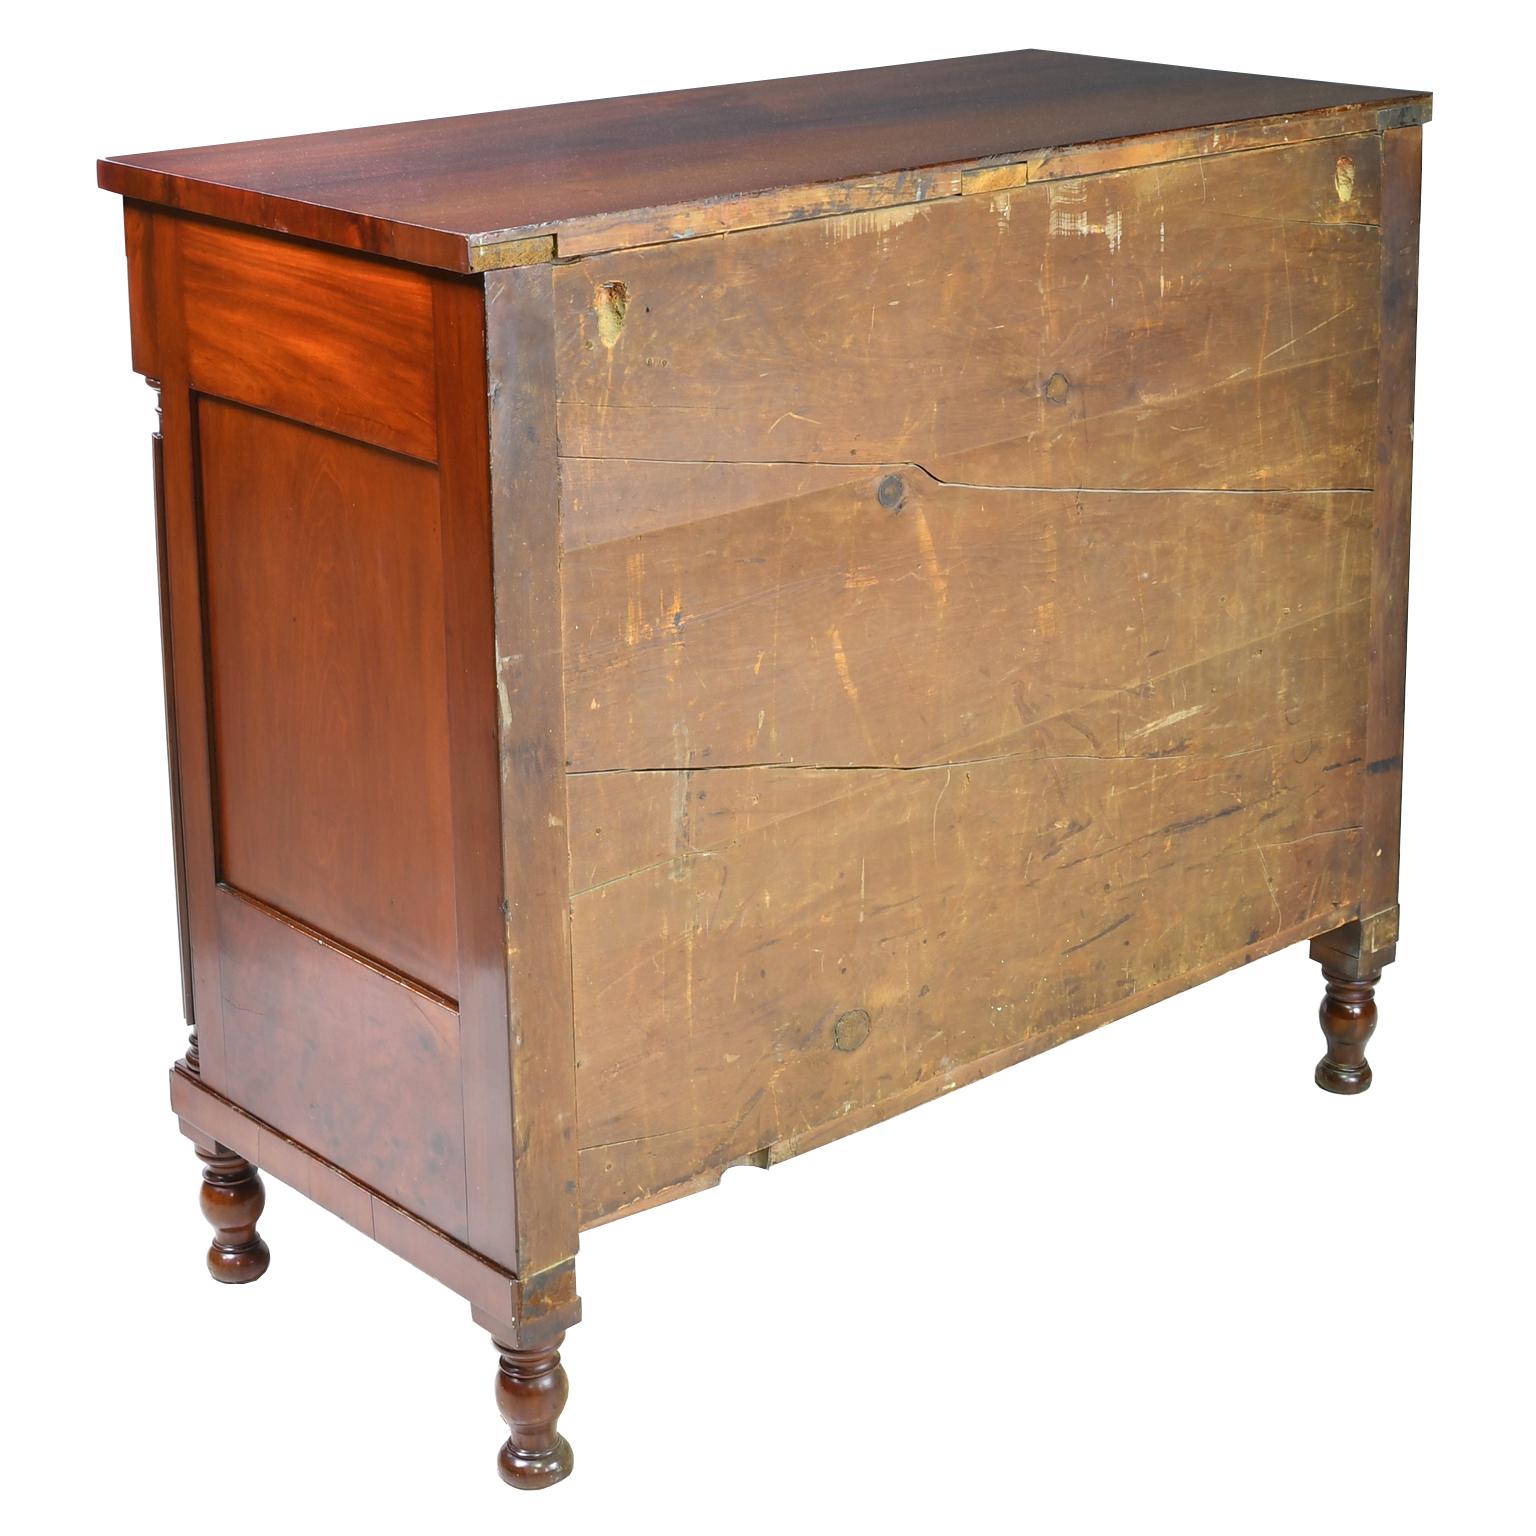 19th Century American Federal Chest of Drawers in West Indies Mahogany, Baltimore, circa 1835 For Sale